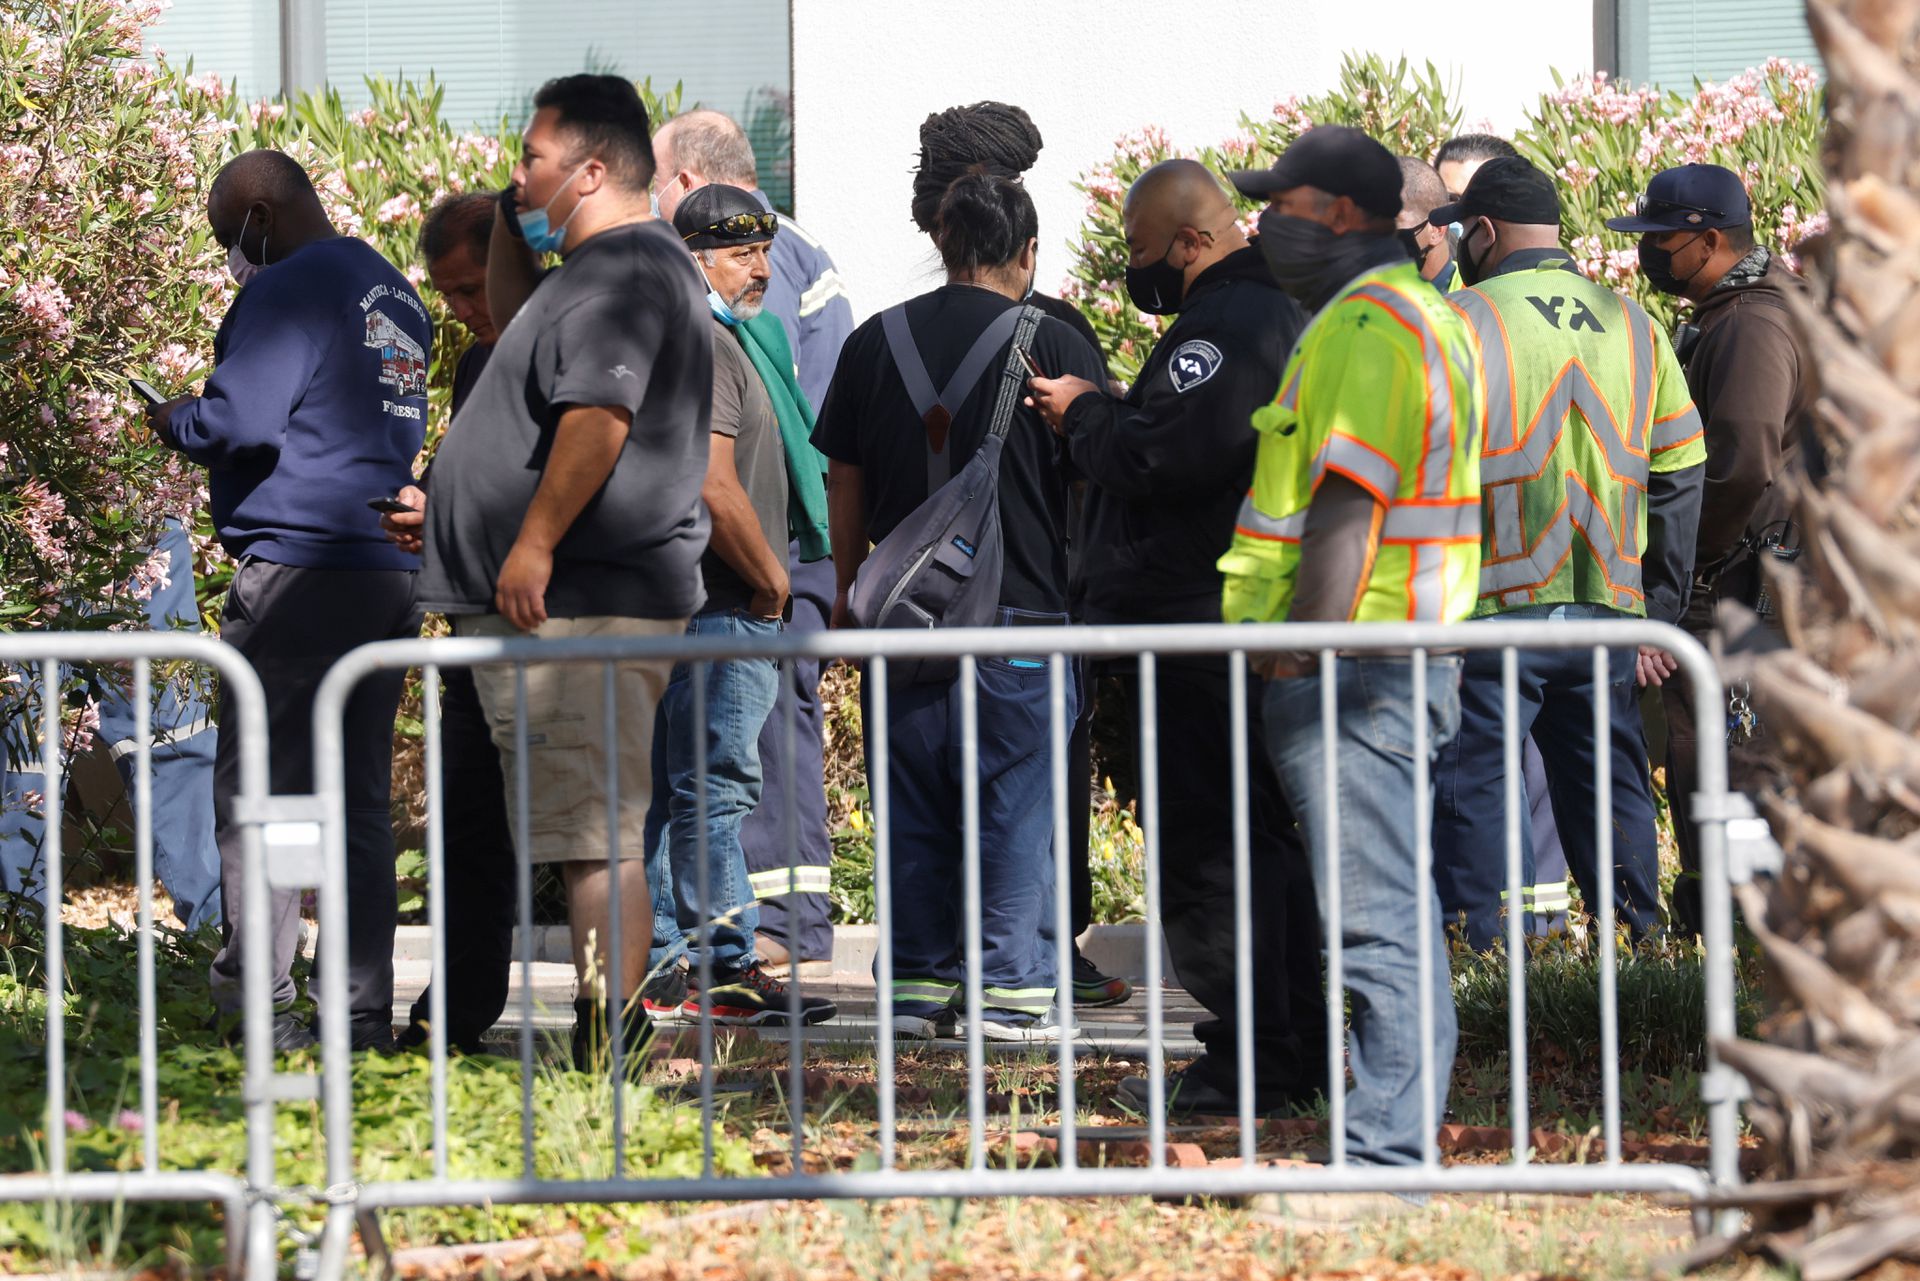 Valley Transportation Authority workers wait outside the Santa Clara Sheriff's offices as police secure the scene of a mass shooting at a rail yard run by the Santa Clara Valley Transportation Authority in San Jose, California, U.S. May 26, 2021. Photo: Reuters